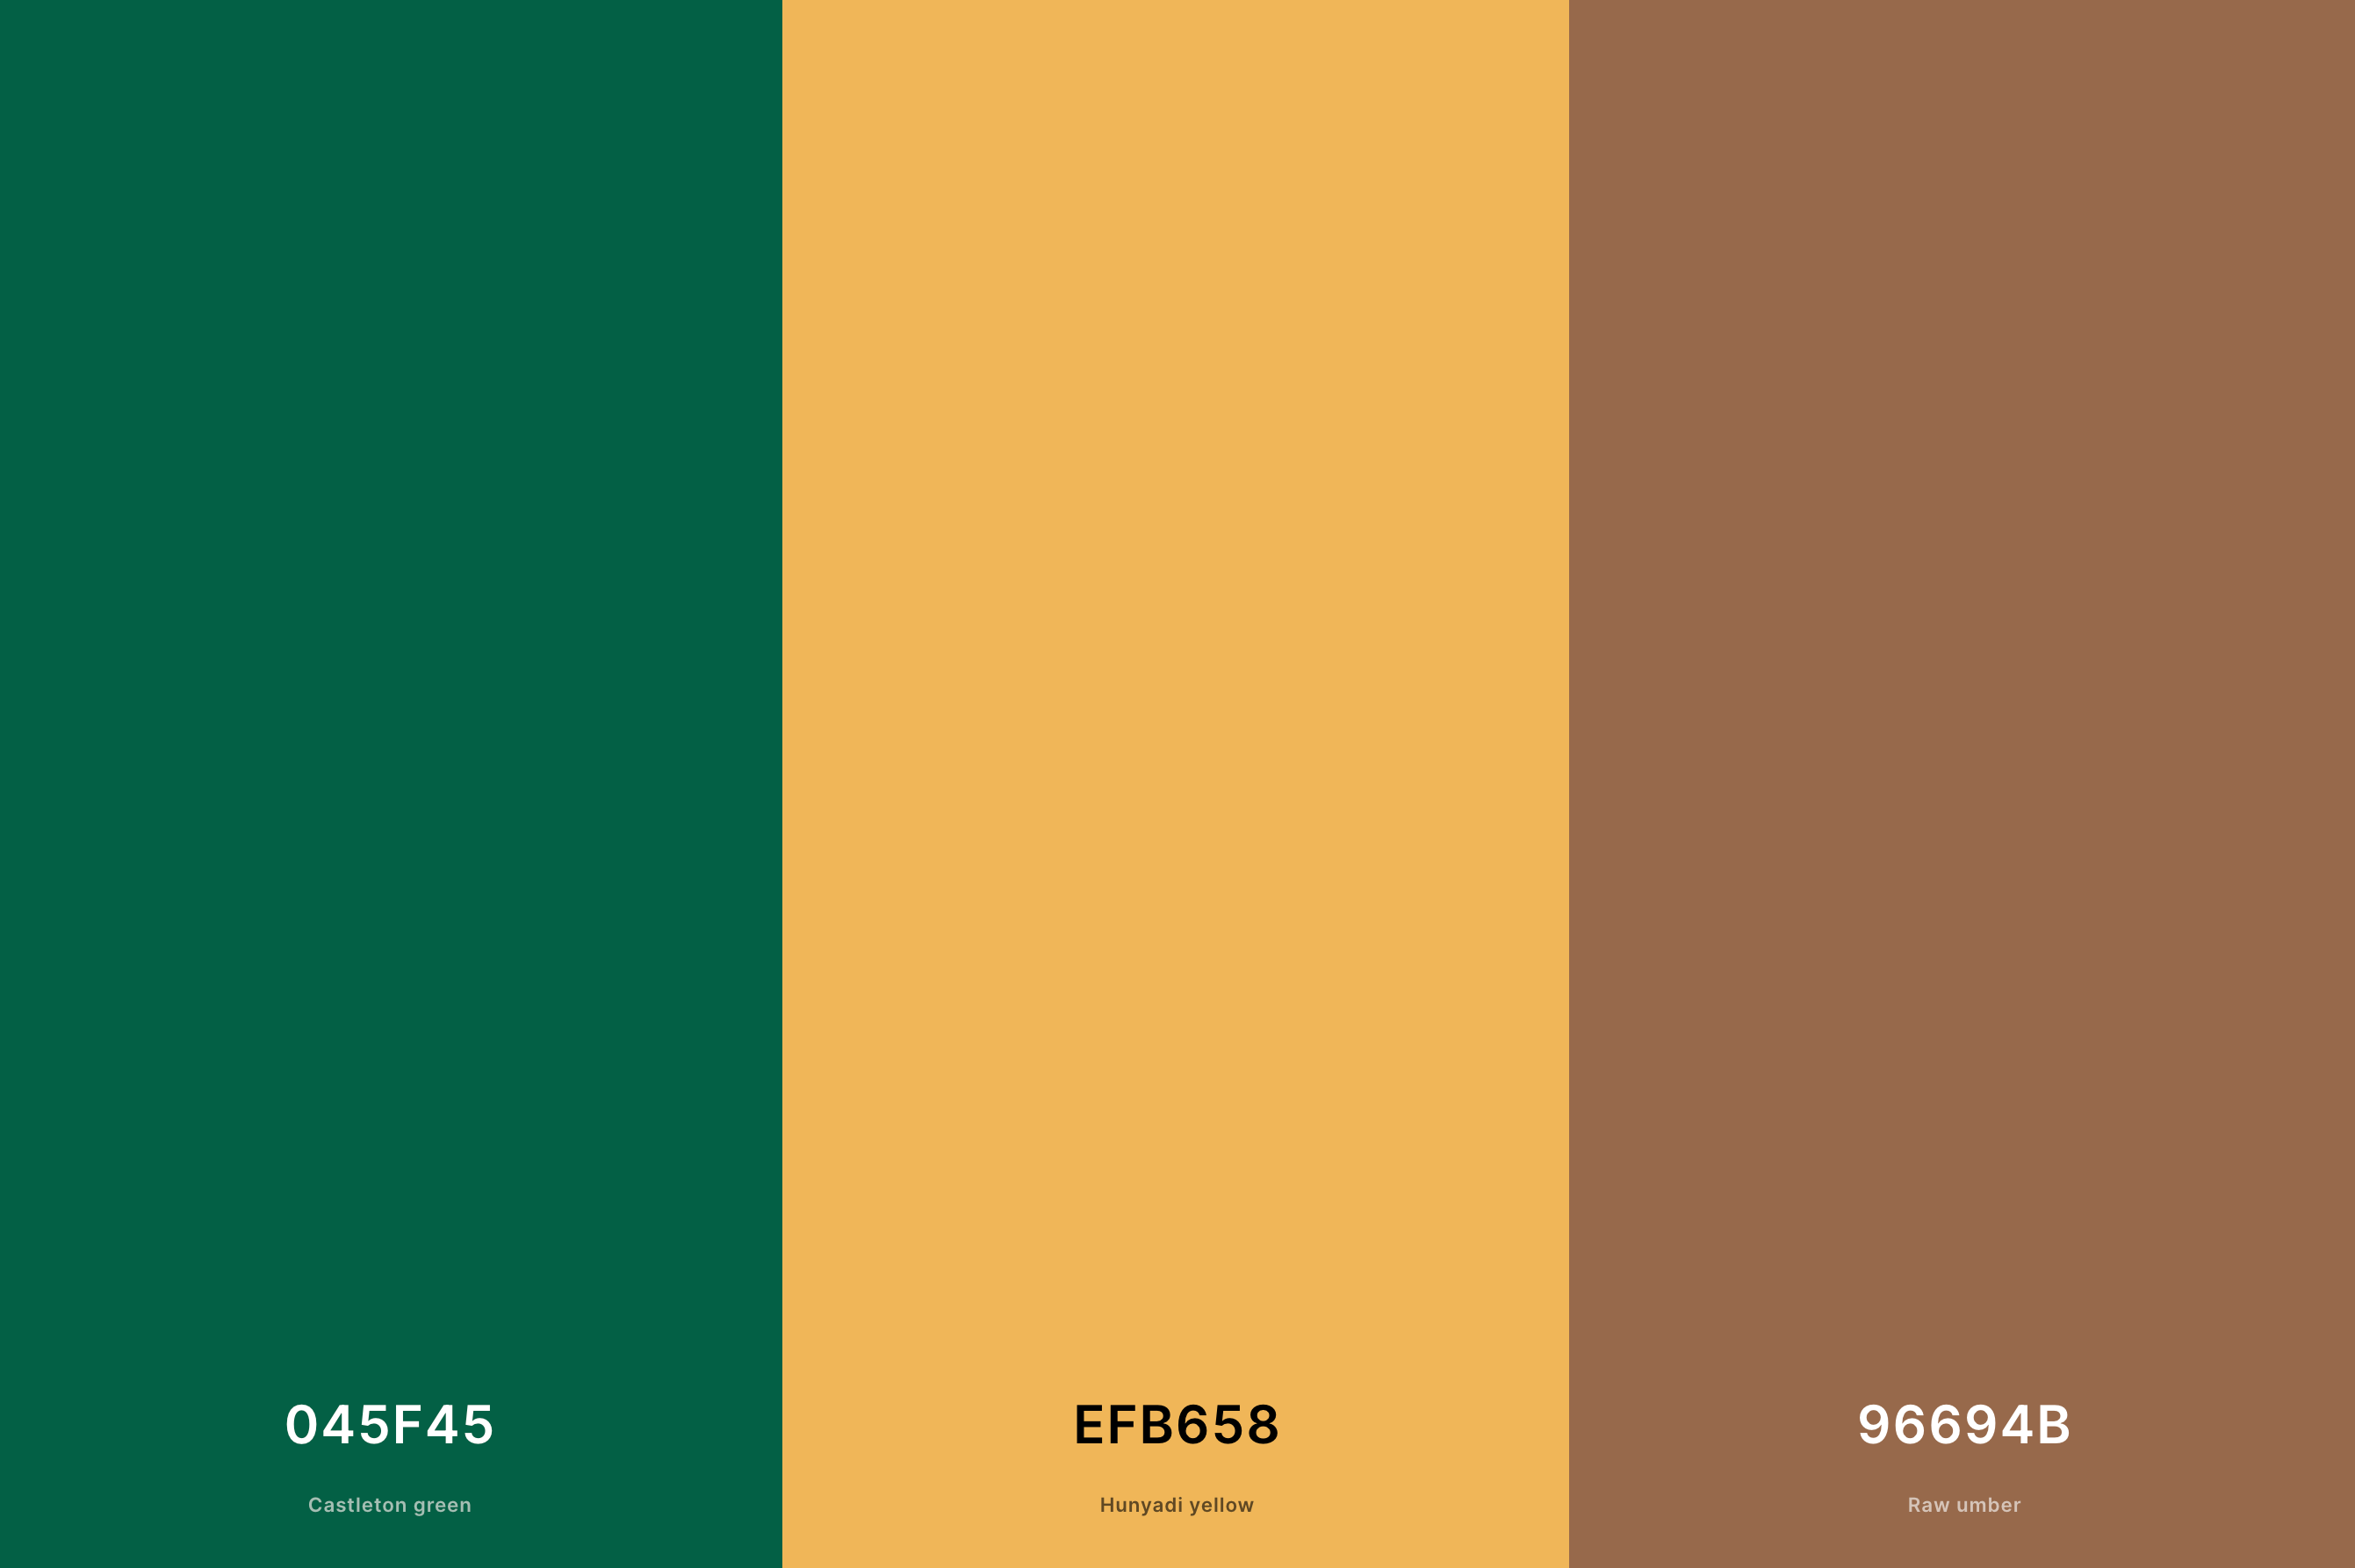 2. Emerald Green and Gold Palette Color Palette with Castleton Green (Hex #045F45) + Hunyadi Yellow (Hex #EFB658) + Raw Umber (Hex #96694B) with Hex Codes